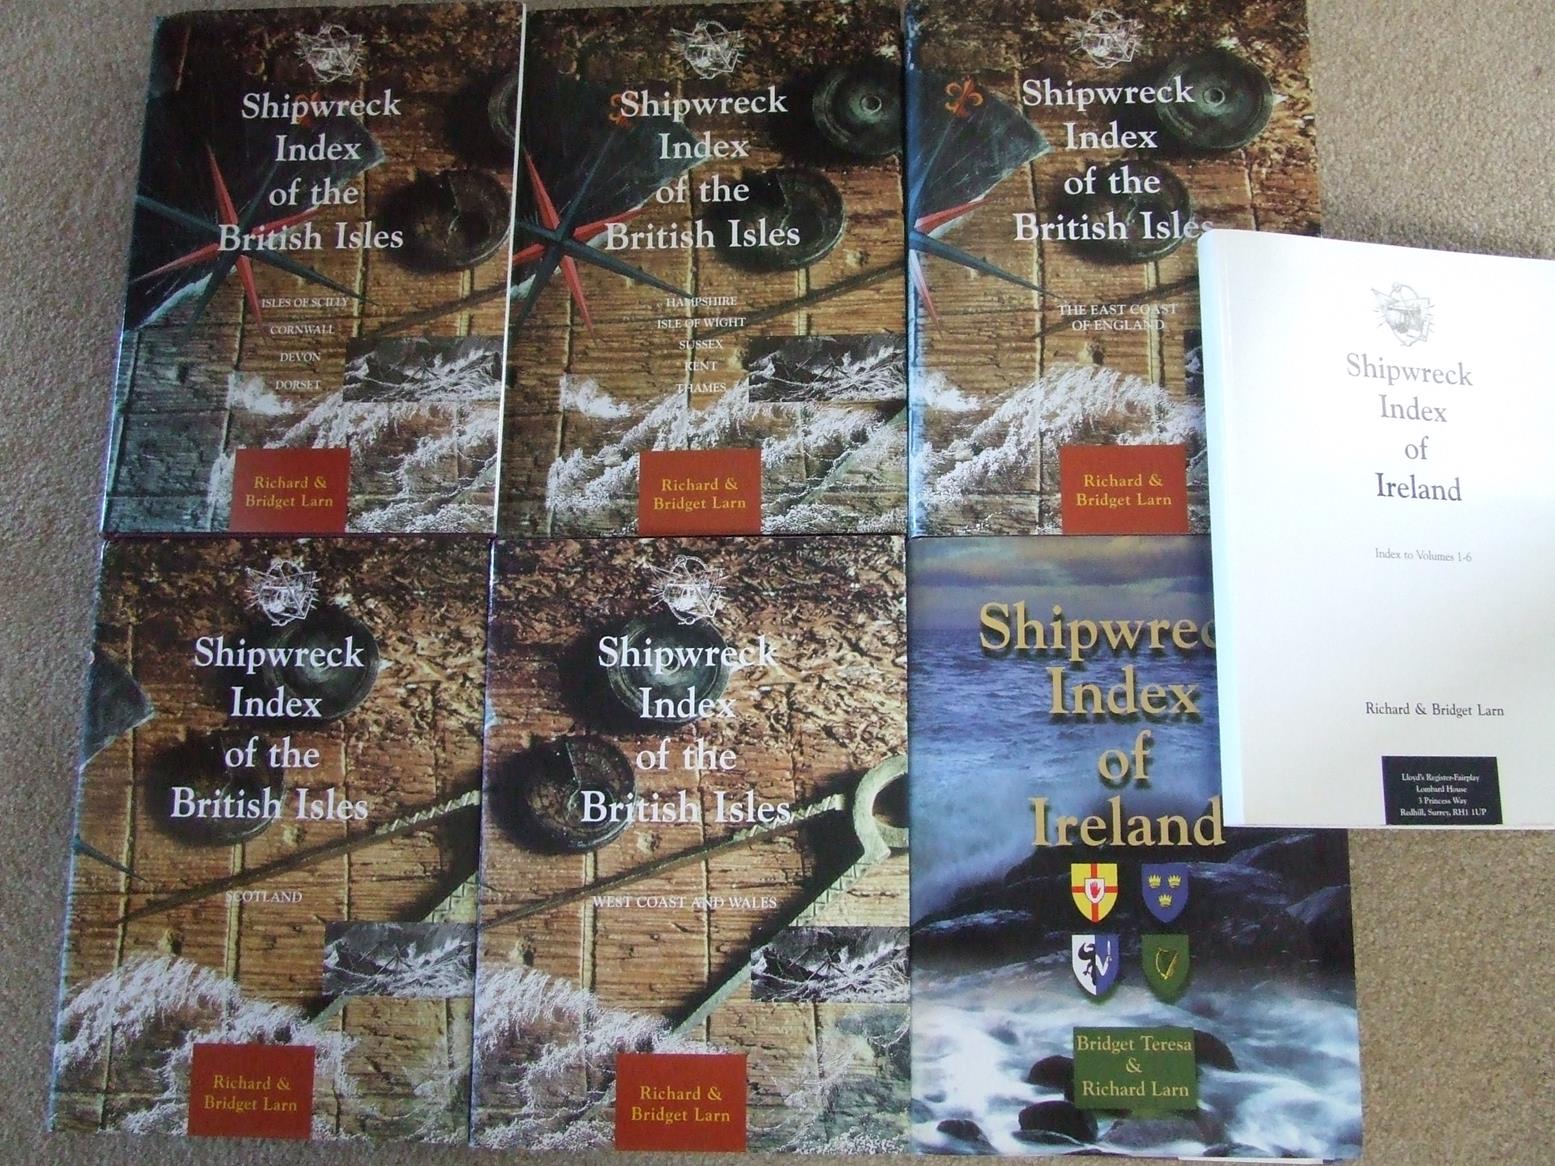 Shipwreck Index of the British Isles - complete set